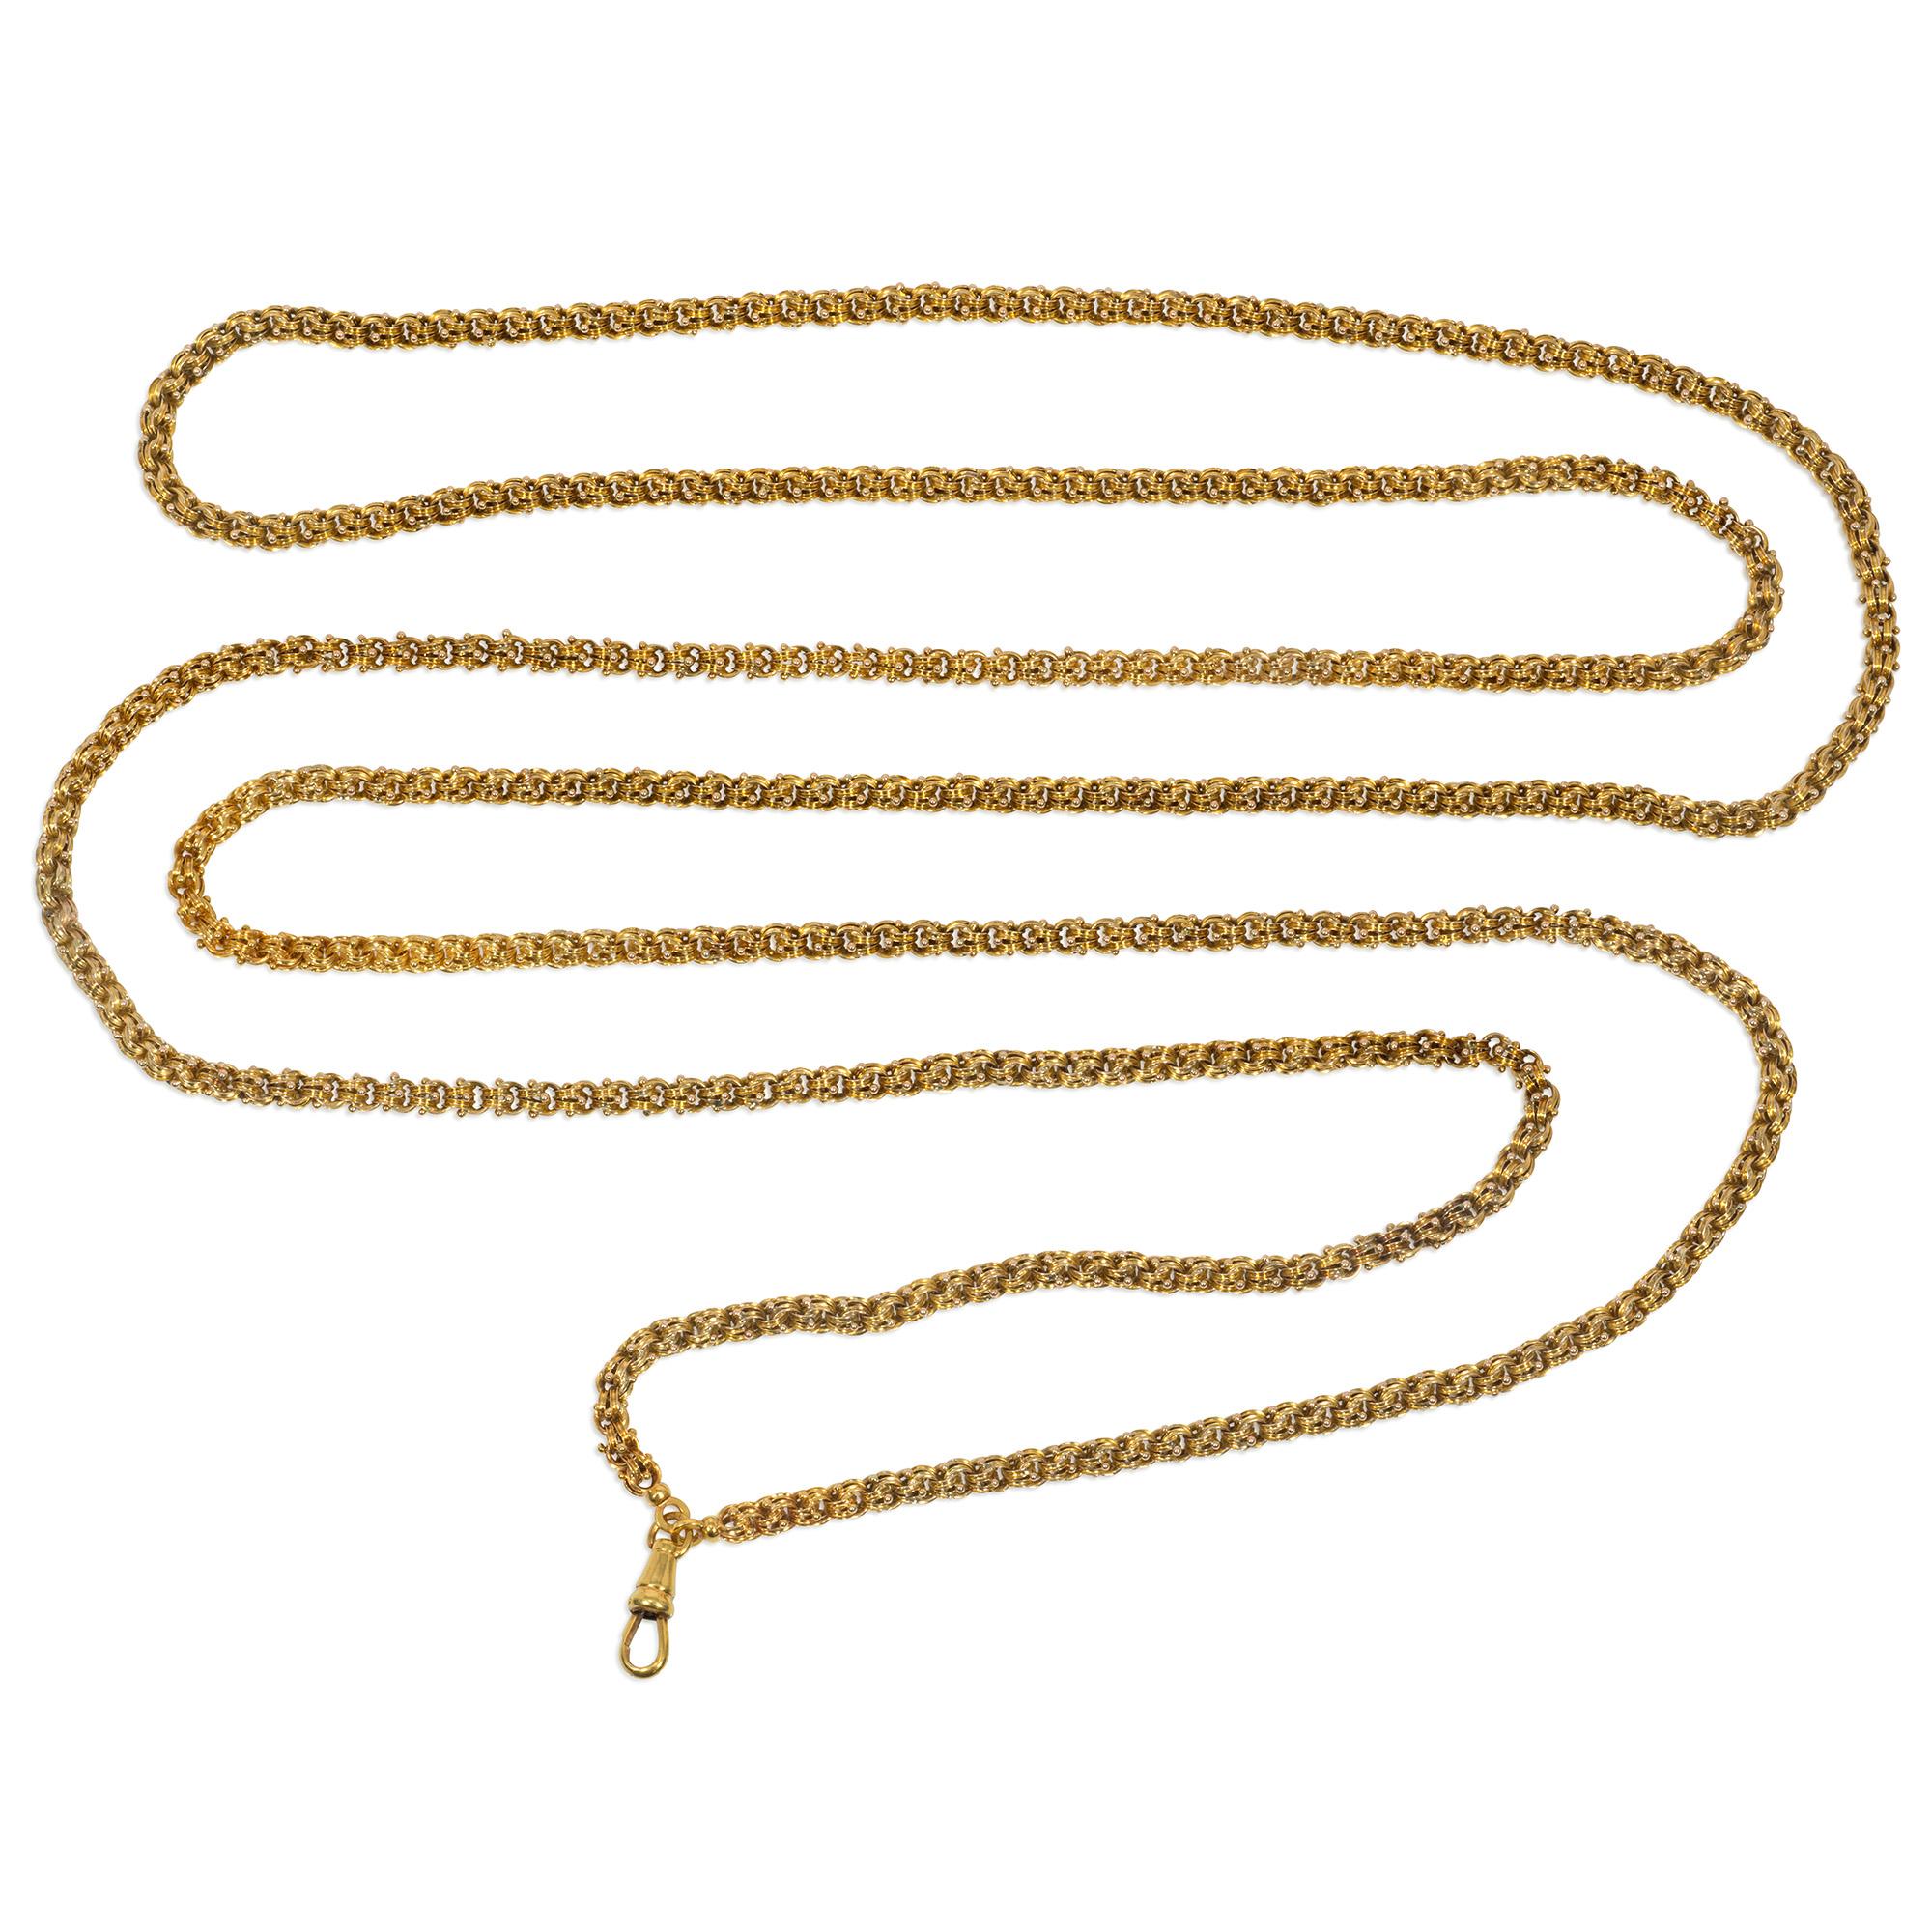 An antique Victorian period gold long guard chain comprised of handmade, interlocking reeded and beaded links, in 15k.  England. (French swivel hinged bale in 18k.)  Gorgeously substantial gauge, 67